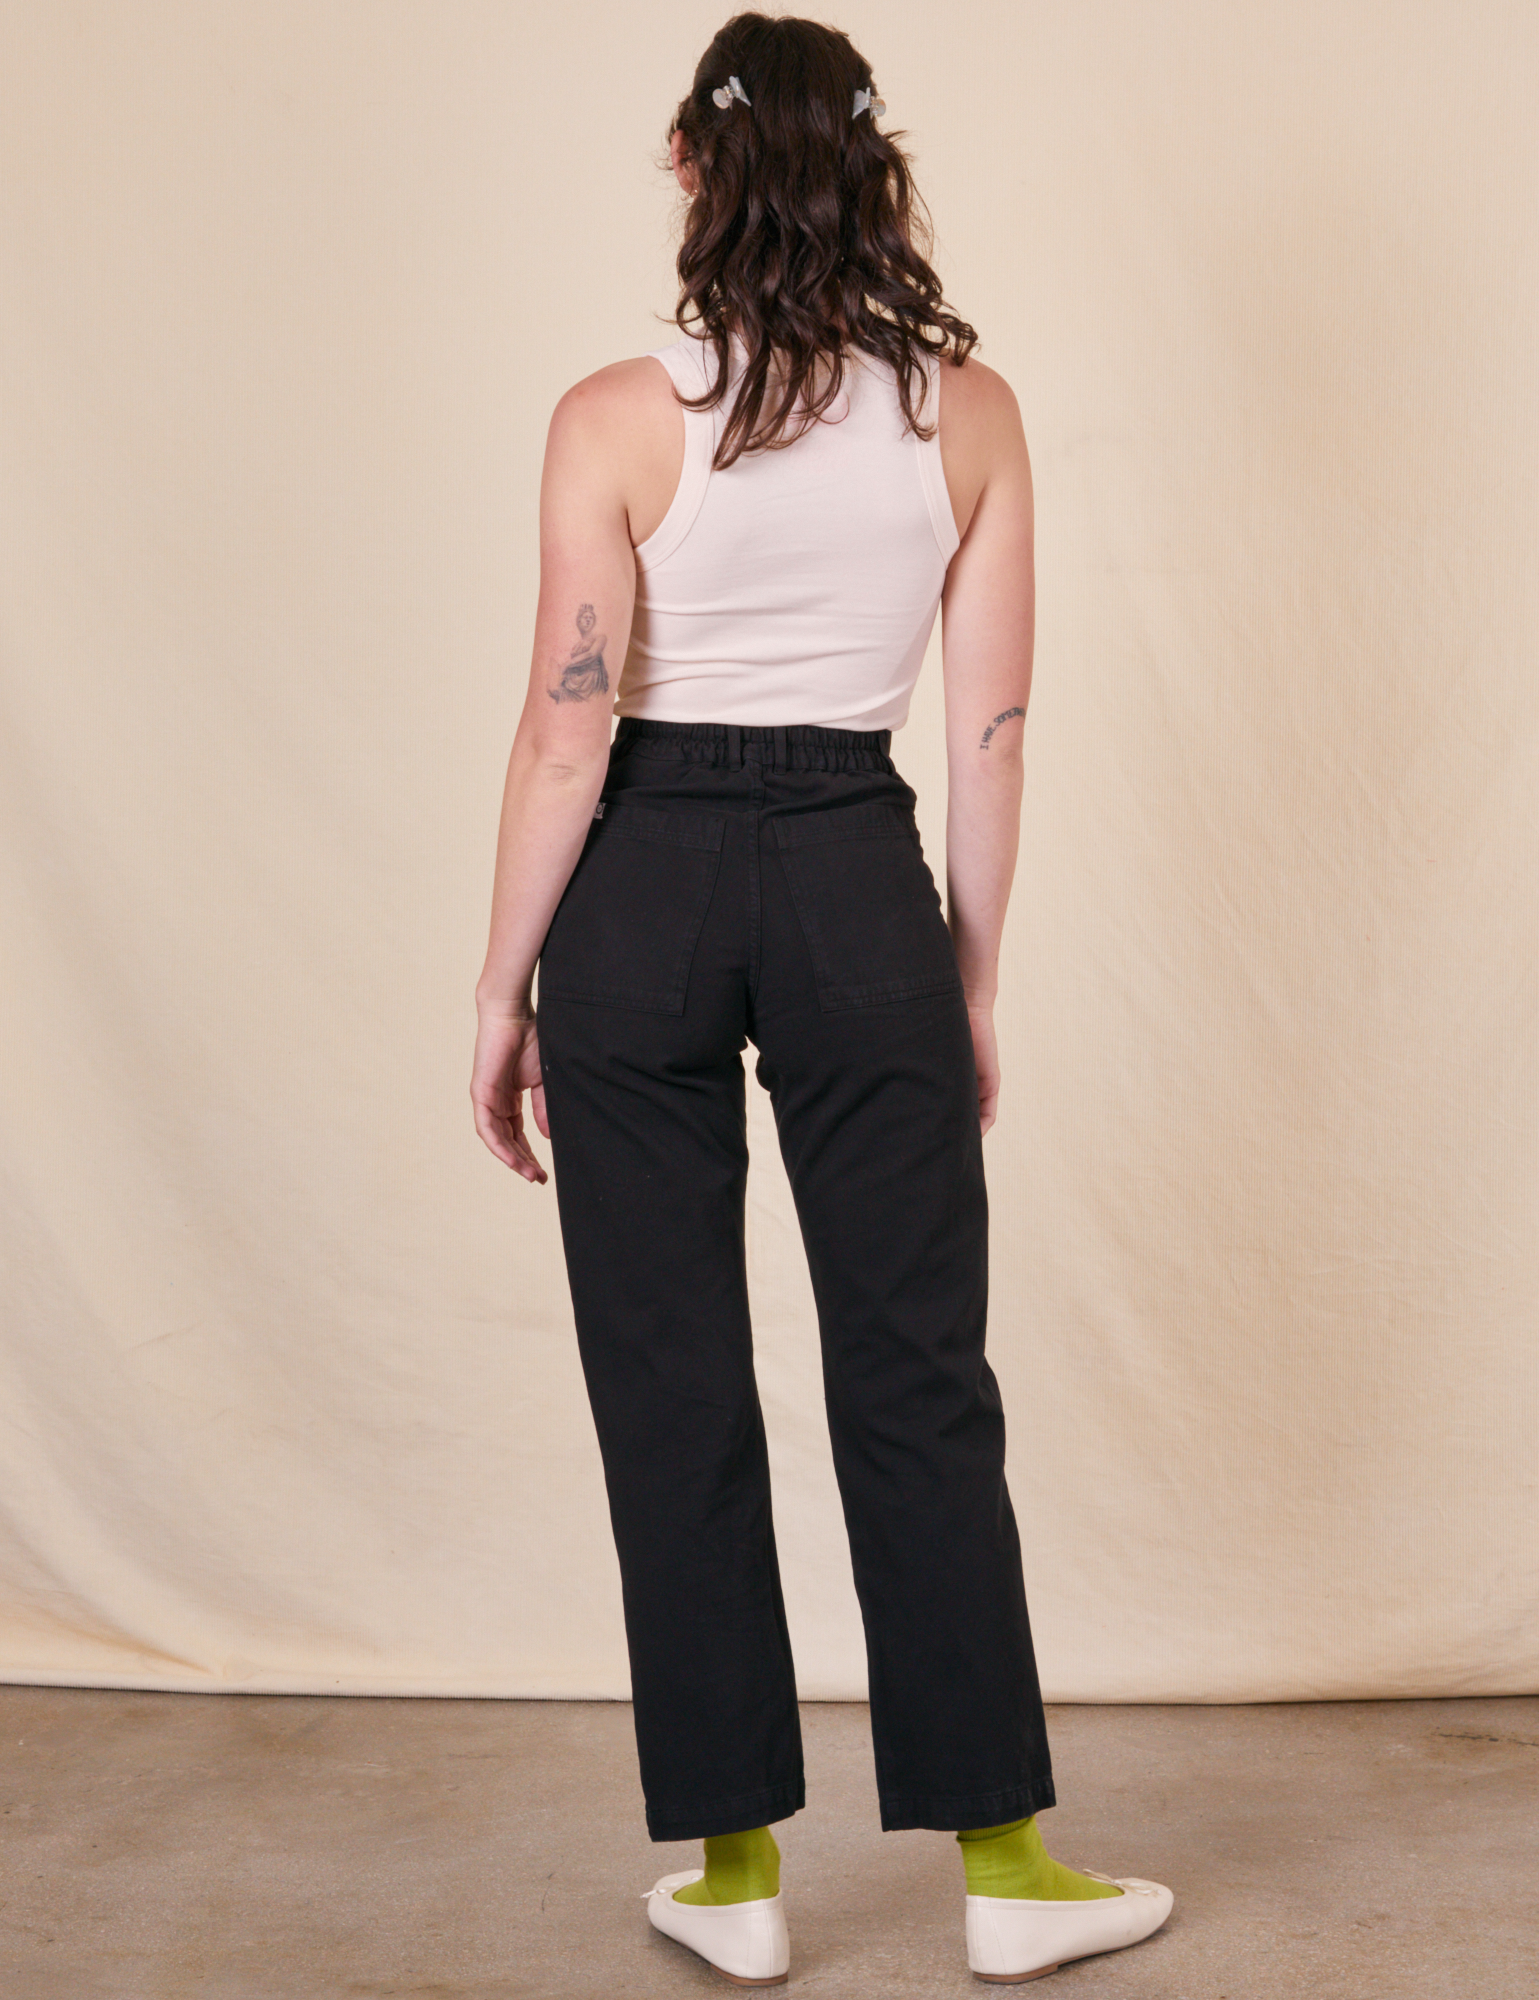 Back view of Work Pants in Basic Black and vintage off-white Tank Top on Alex